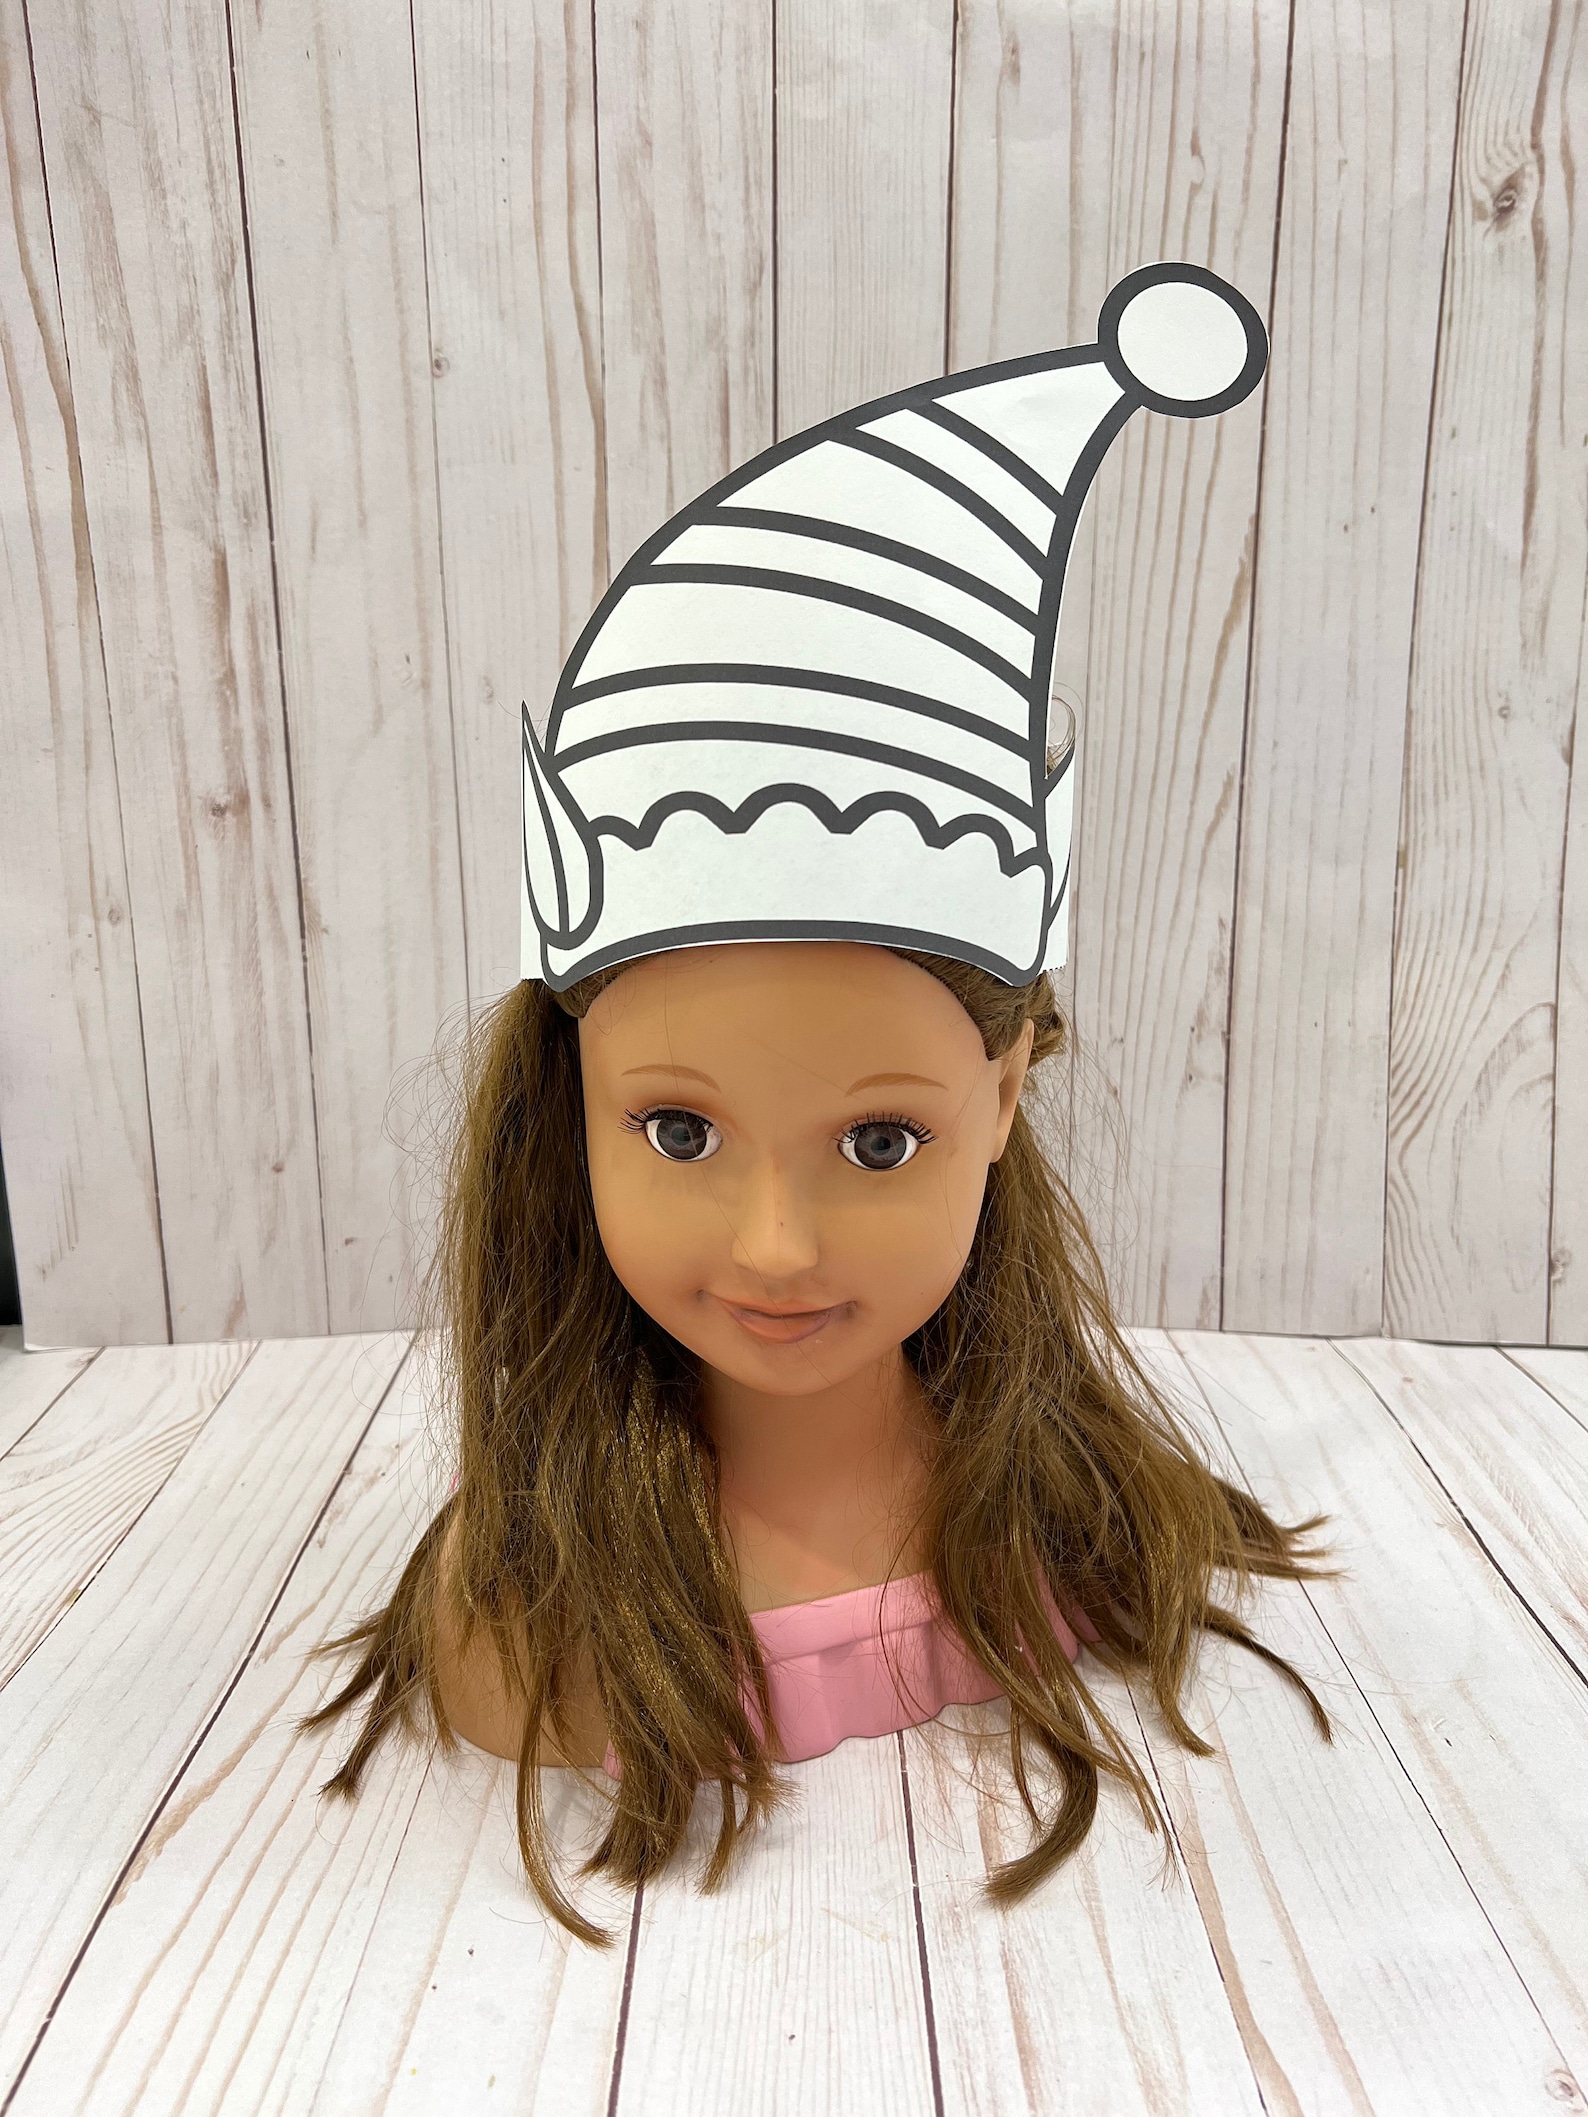 elf-hat-paper-craft-christmas-party-hats-school-play-download-now-etsy